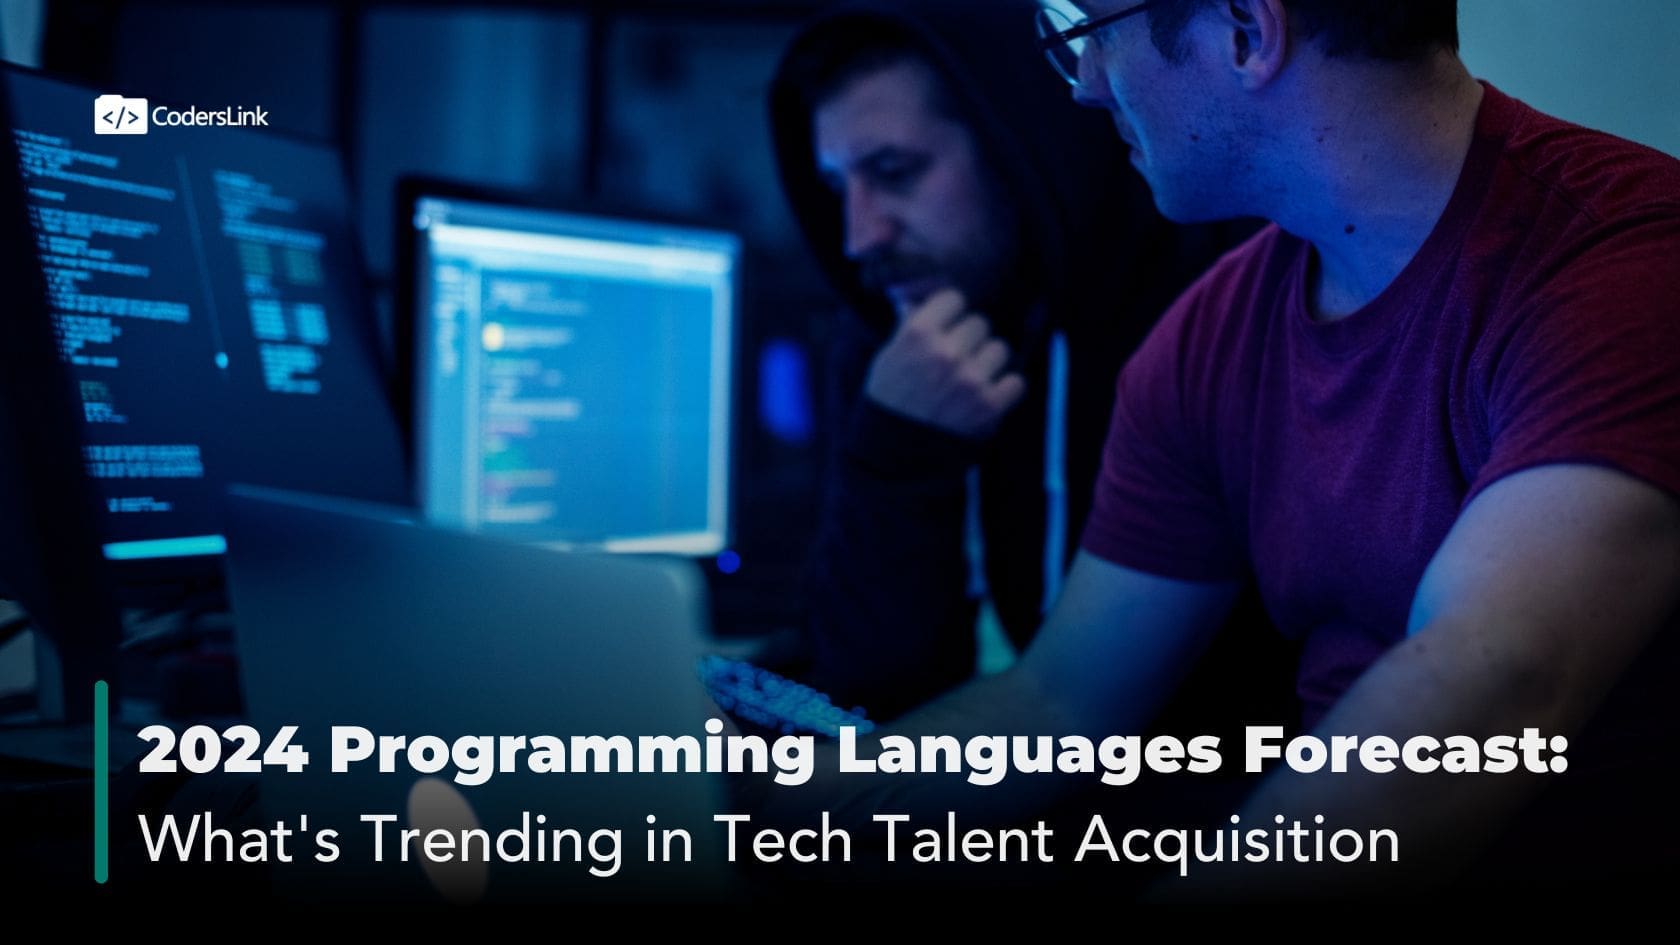 2024 Programming Languages Forecast: What's Trending in Tech Talent Acquisition